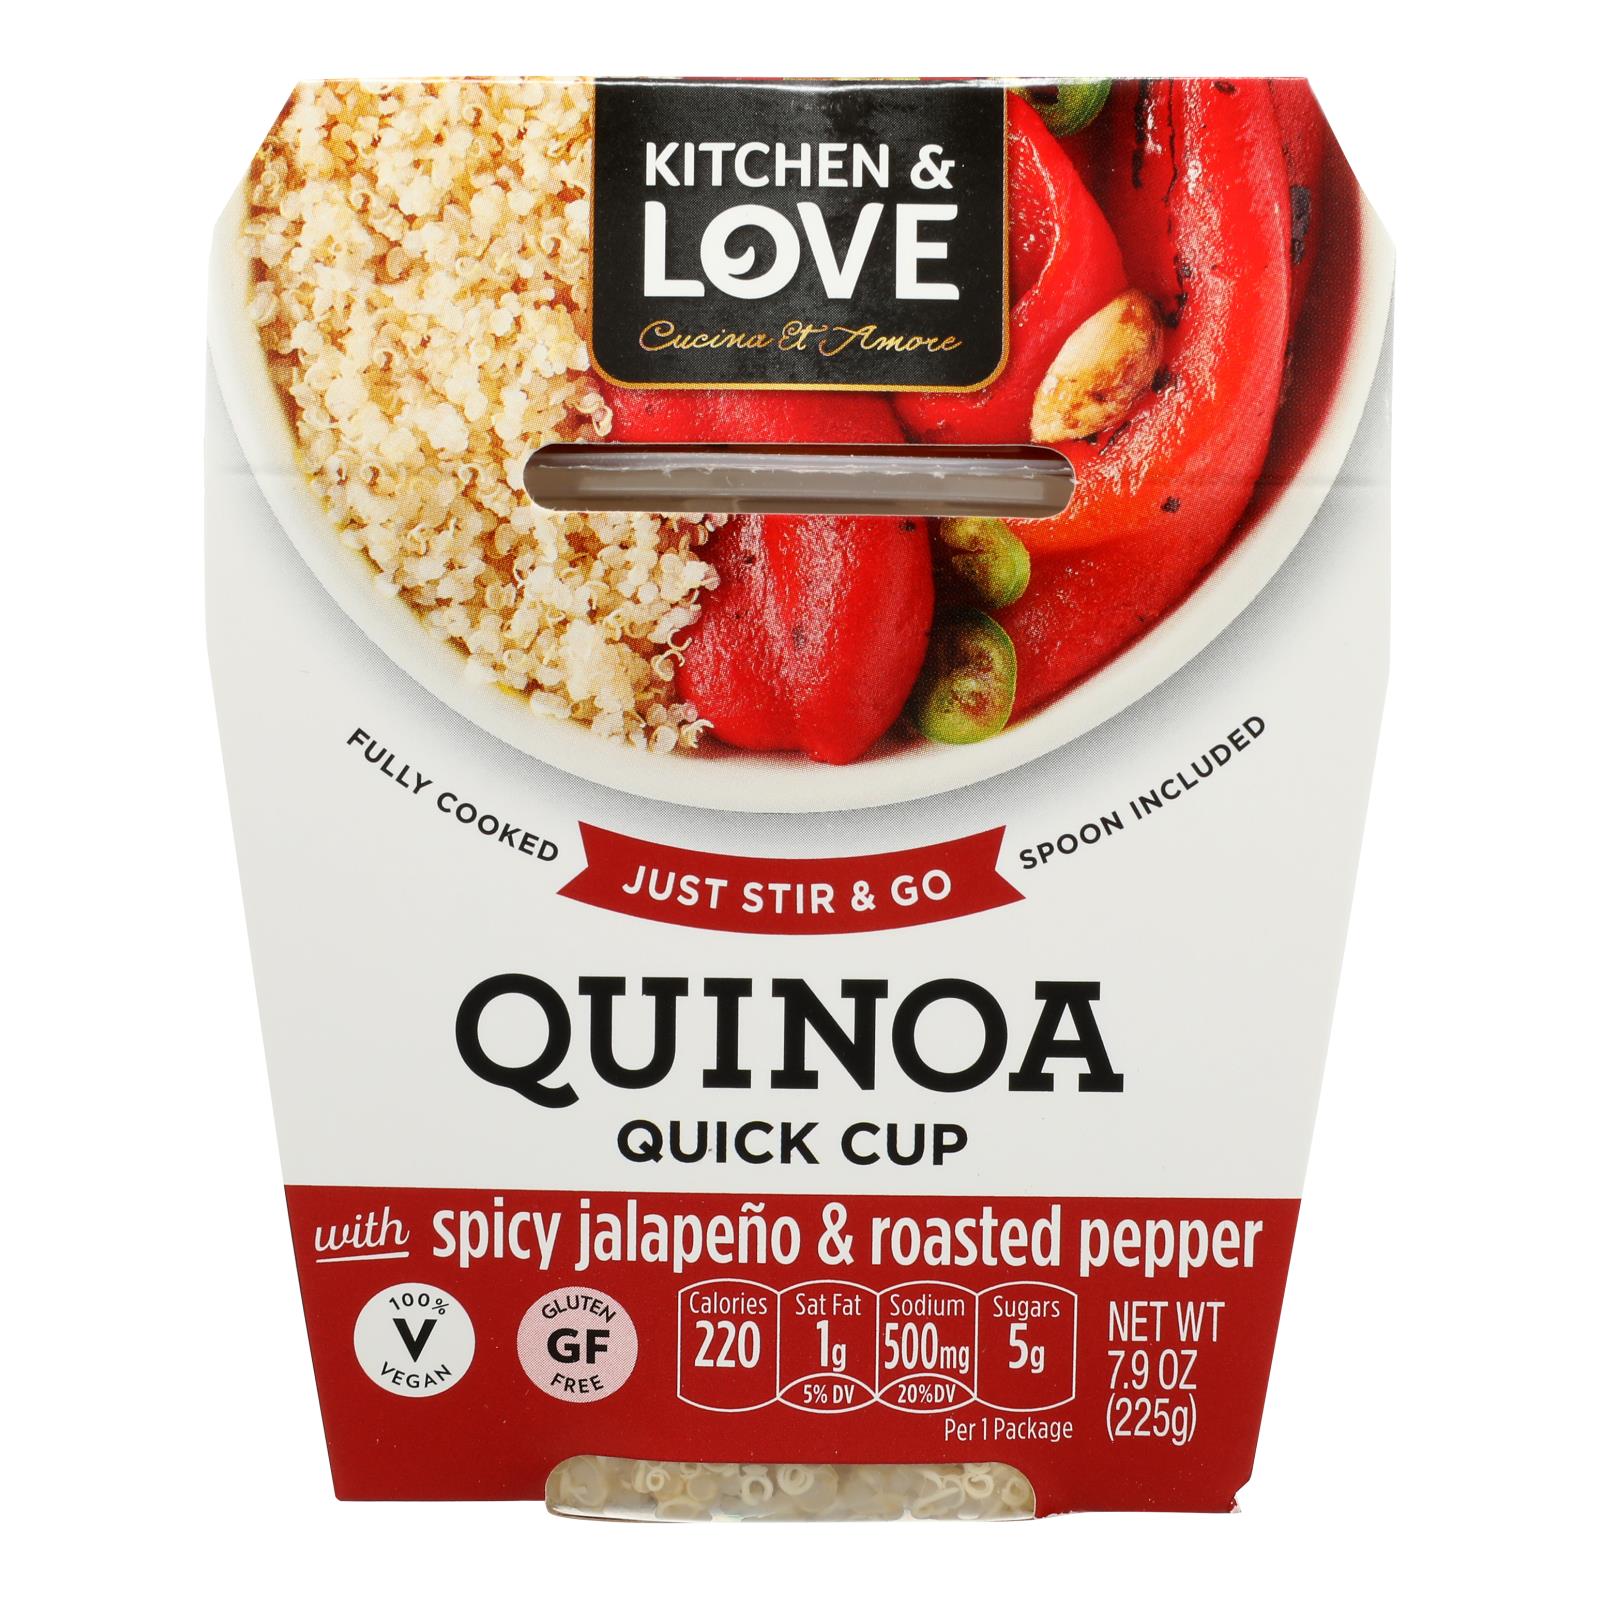 Cucina And Amore - Quinoa Meals - Spicy Jalapeno And Roasted Peppers - Case Of 6 - 7.9 Oz.